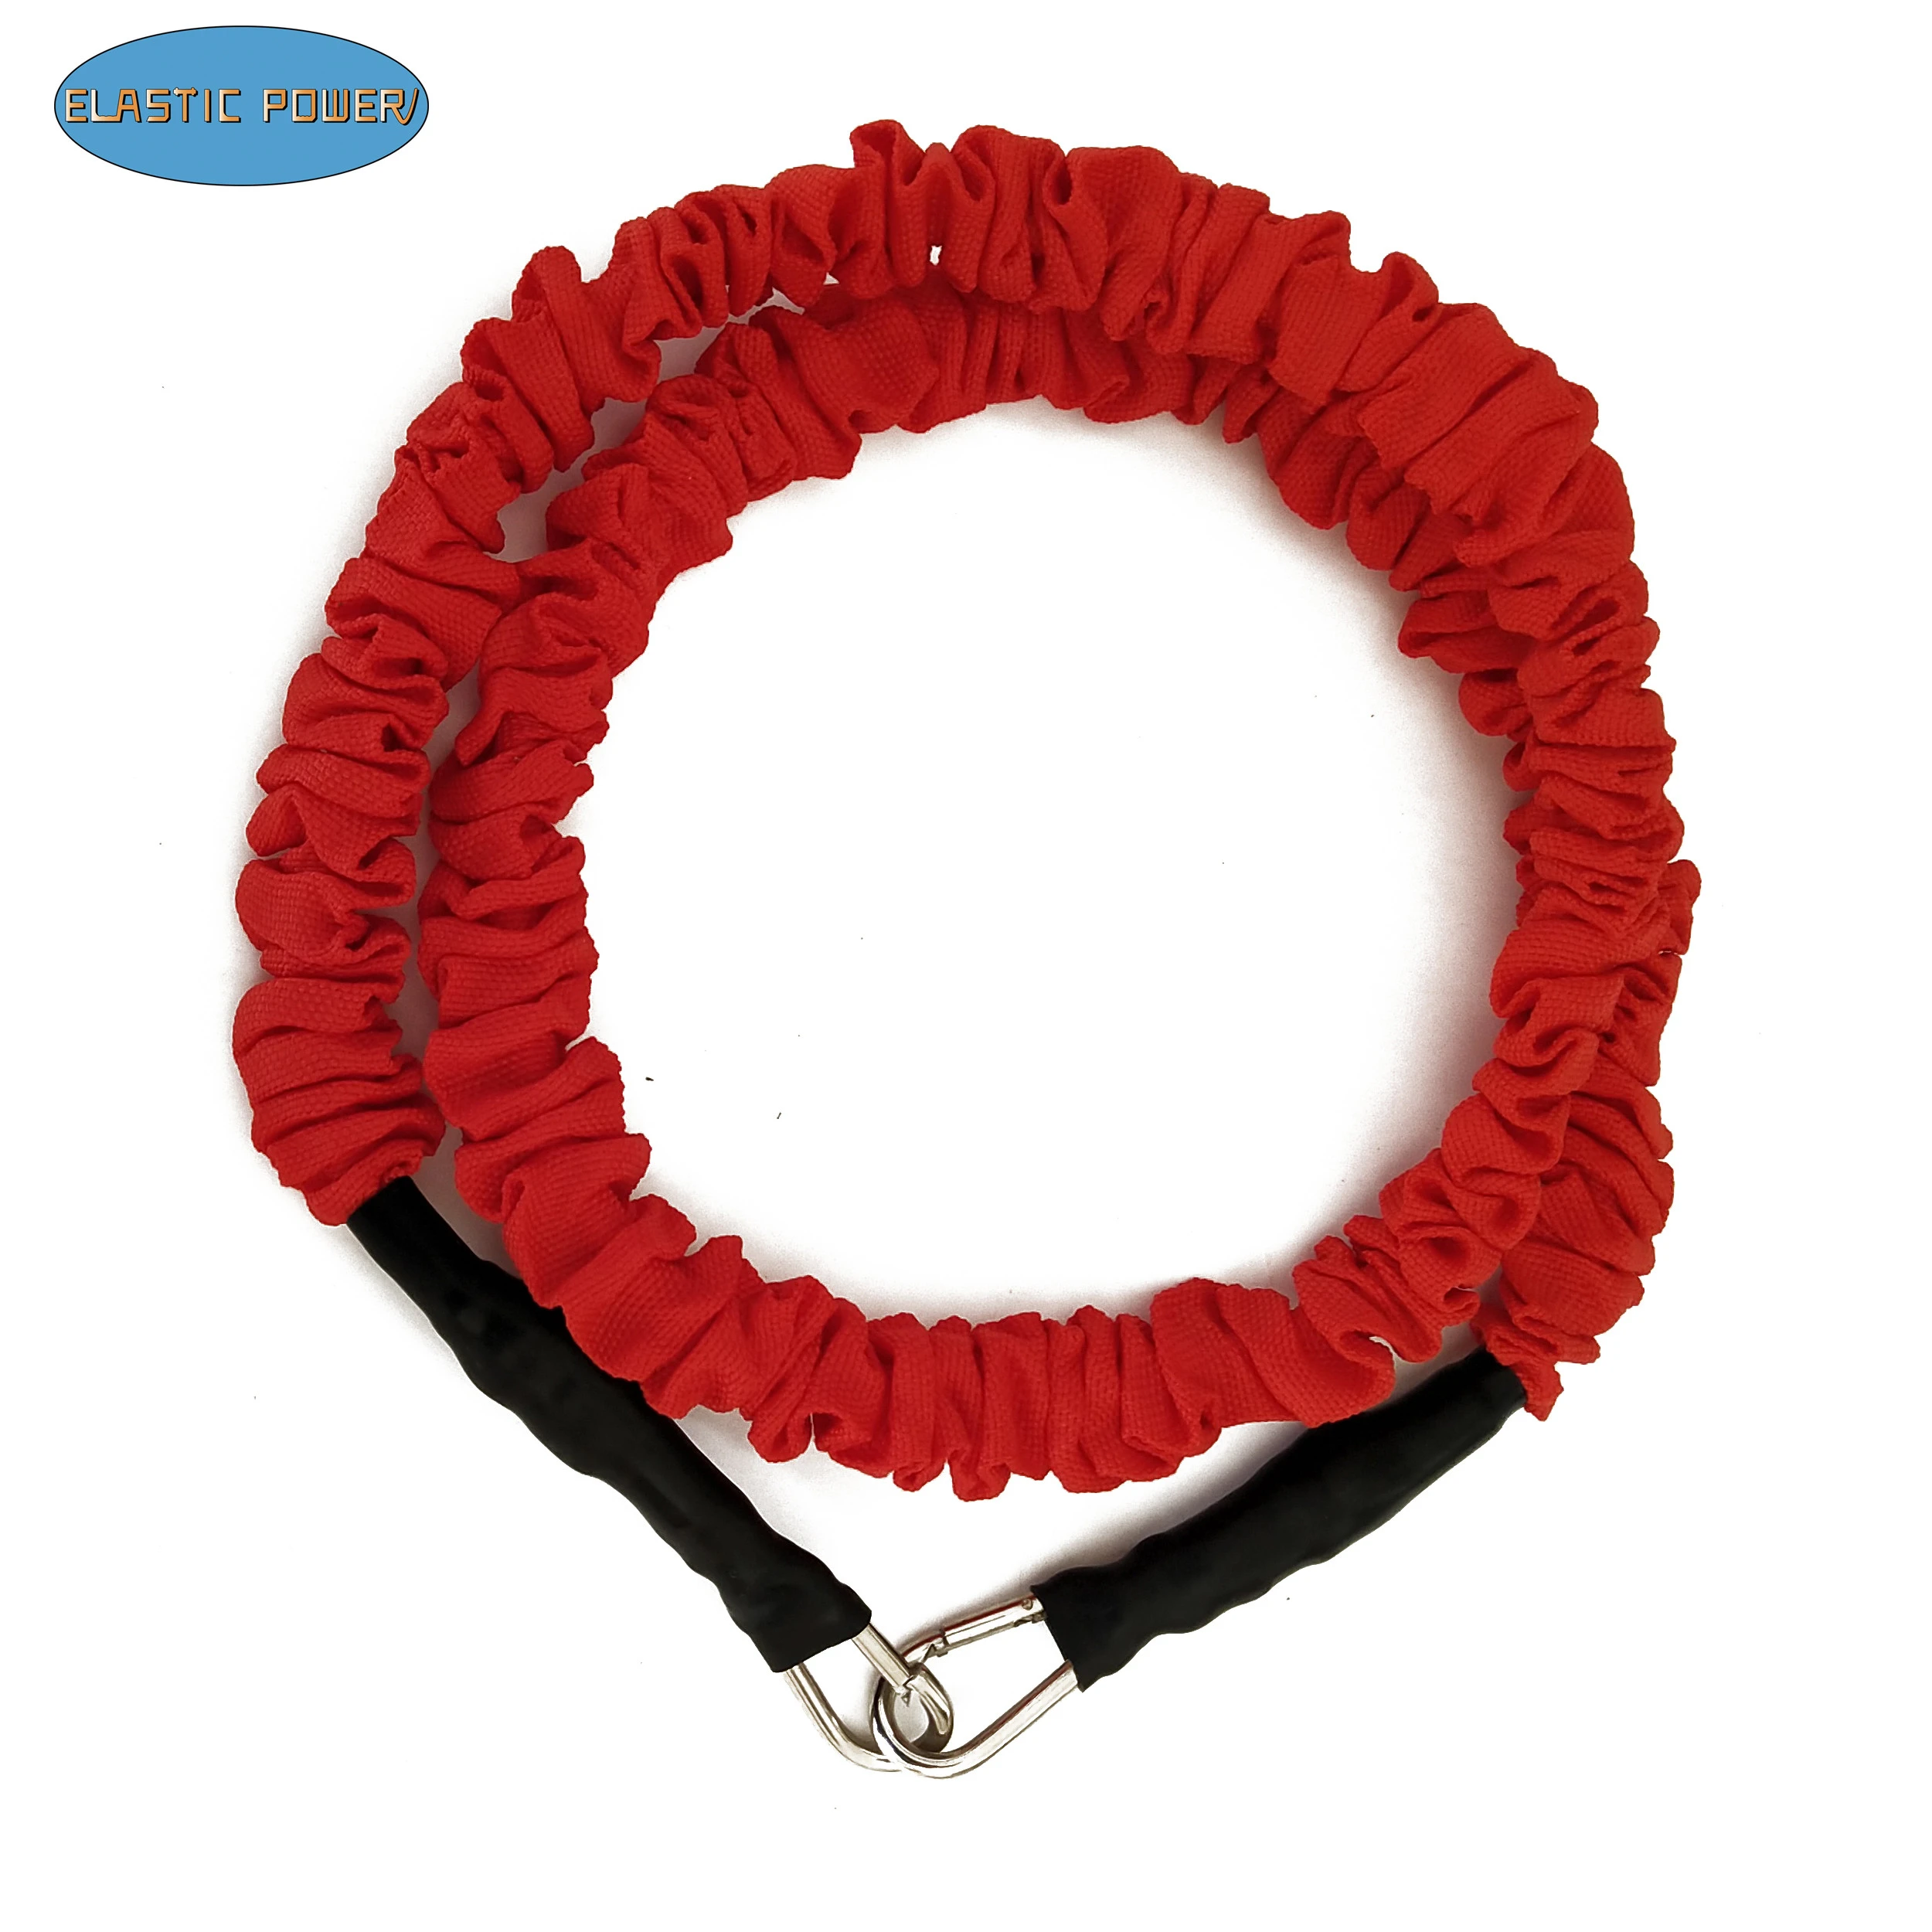 Bungee Cord / Latex Resistance Band